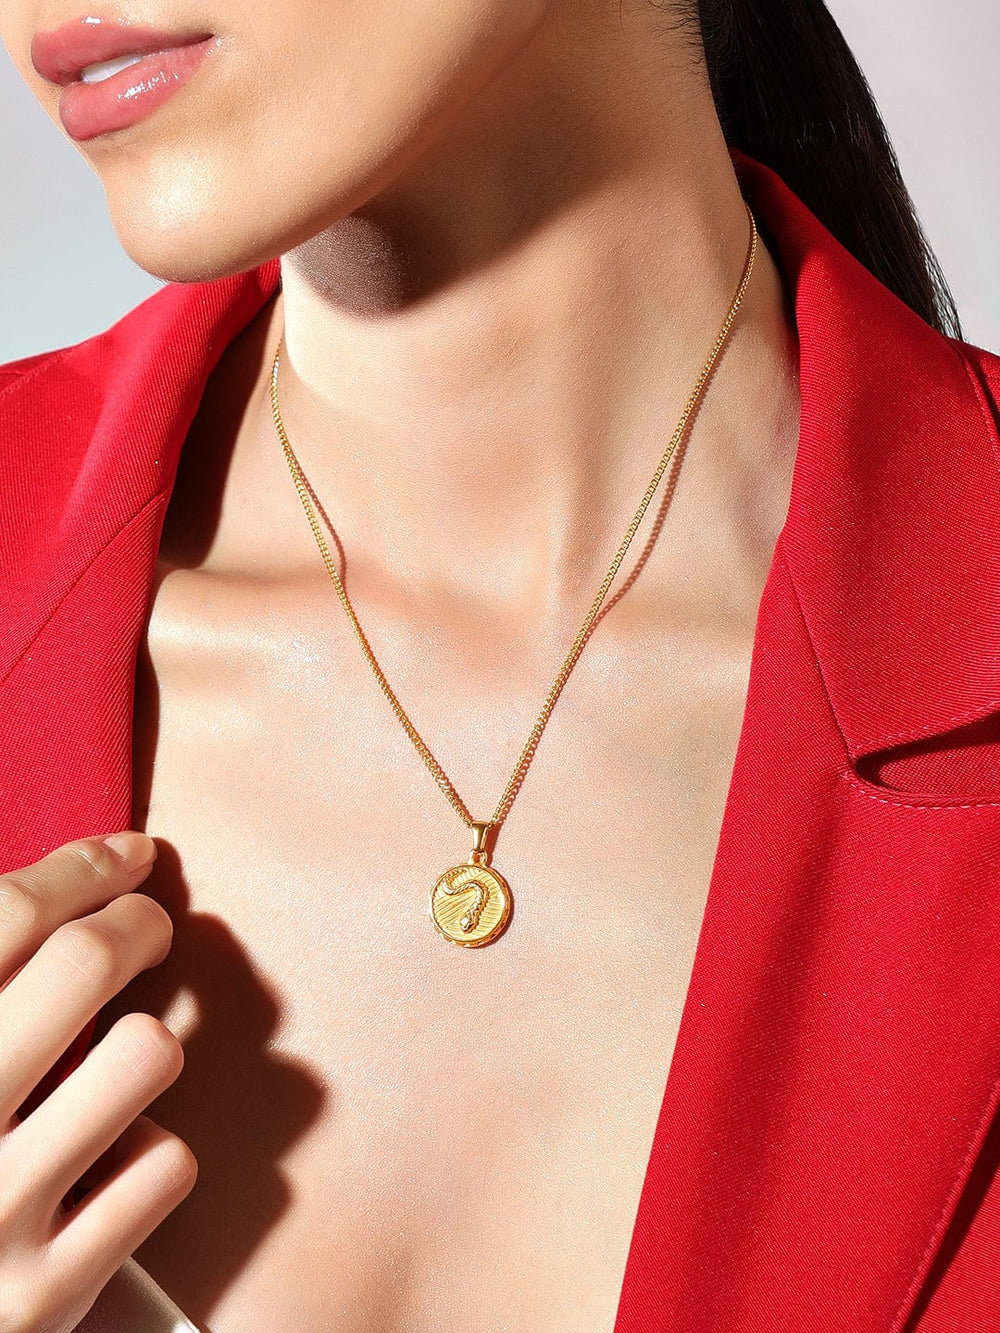 Rubans Voguish 18K Gold Plated Stainless Steel Waterproof Chin With Circle Embossed Pendant. Necklaces, Chains & necklace